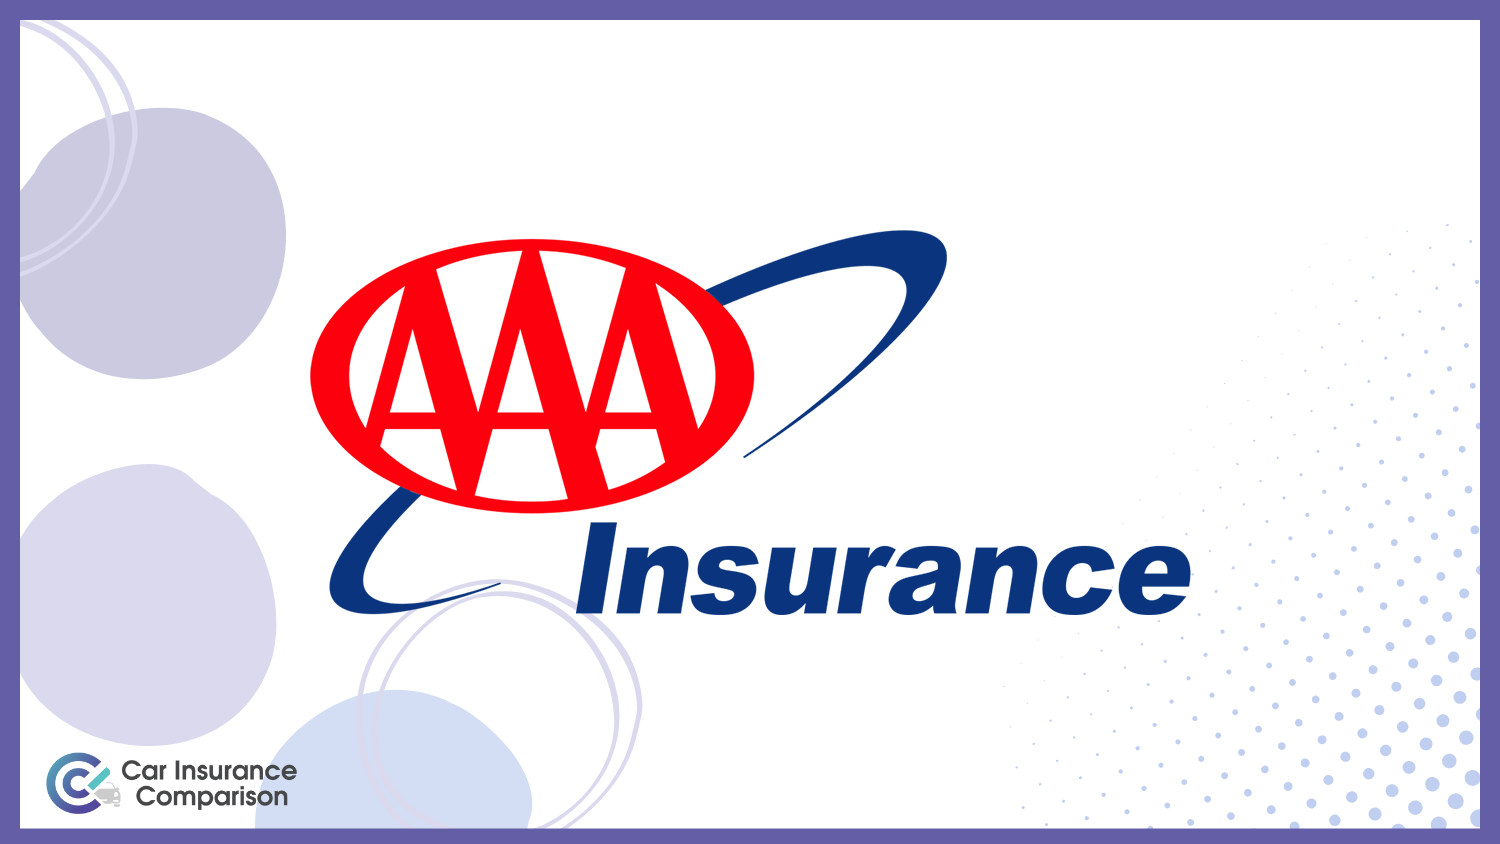 AAA: Best Car Insurance for Convicted Drivers